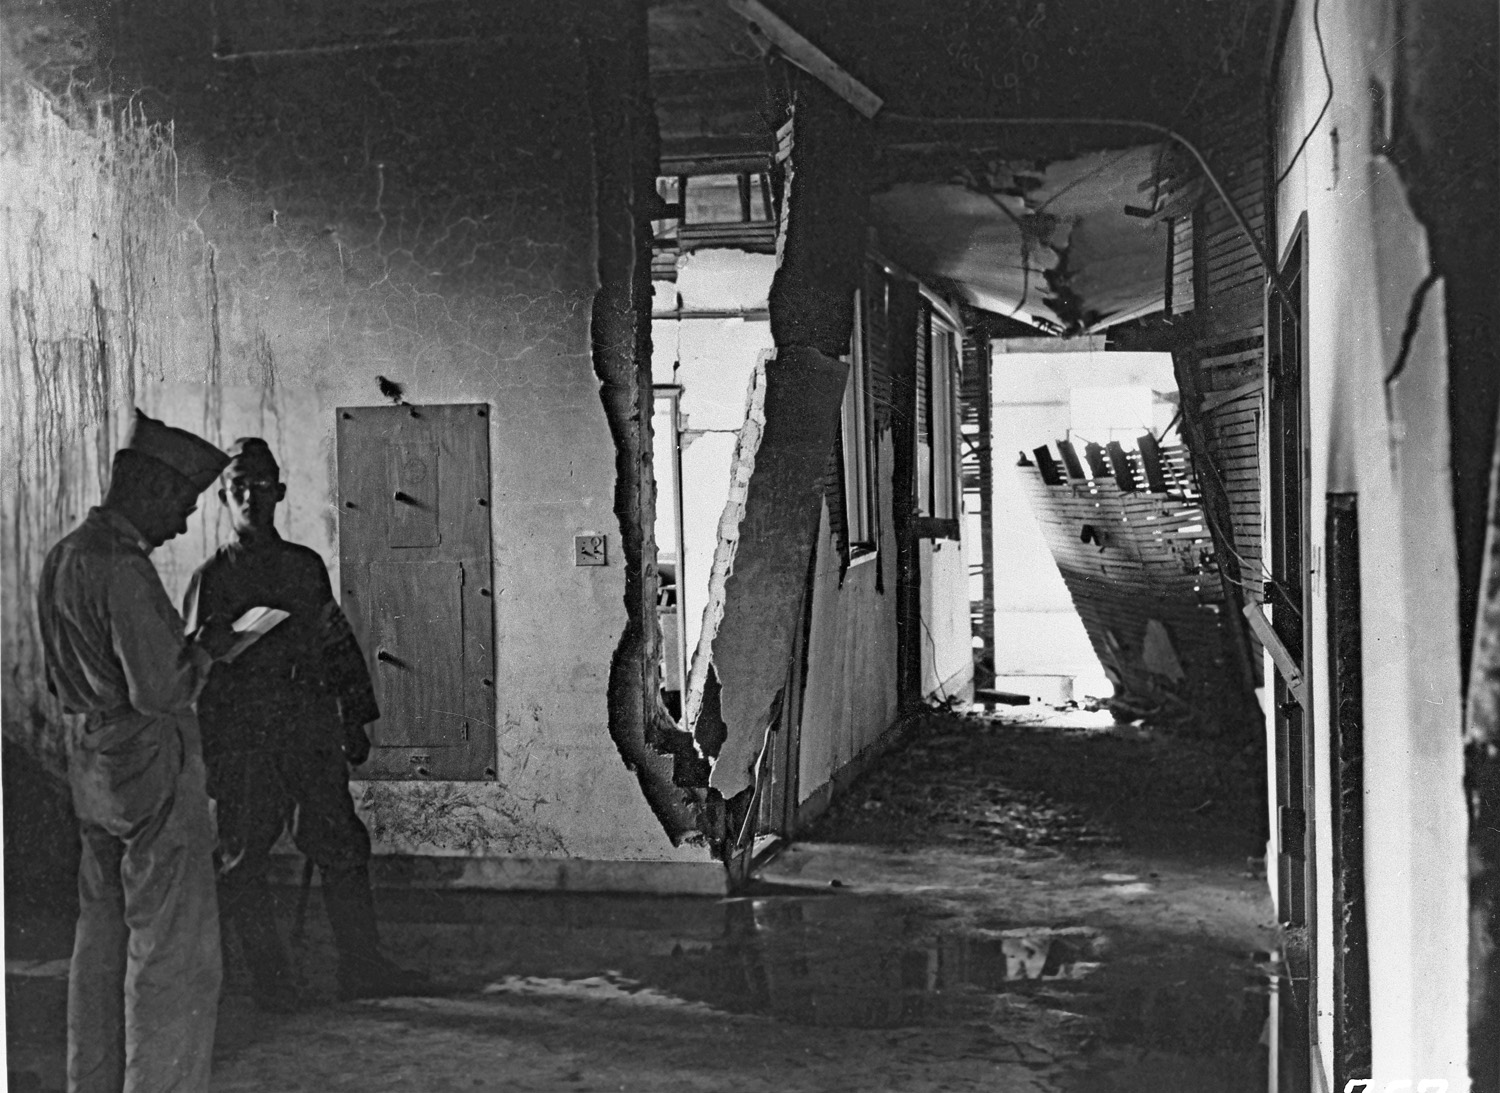 This picture shows two men standing in a house that has clearly been destroyed by the bomb, with walls askew and water damage visible. One is taking notes while the other looks on.